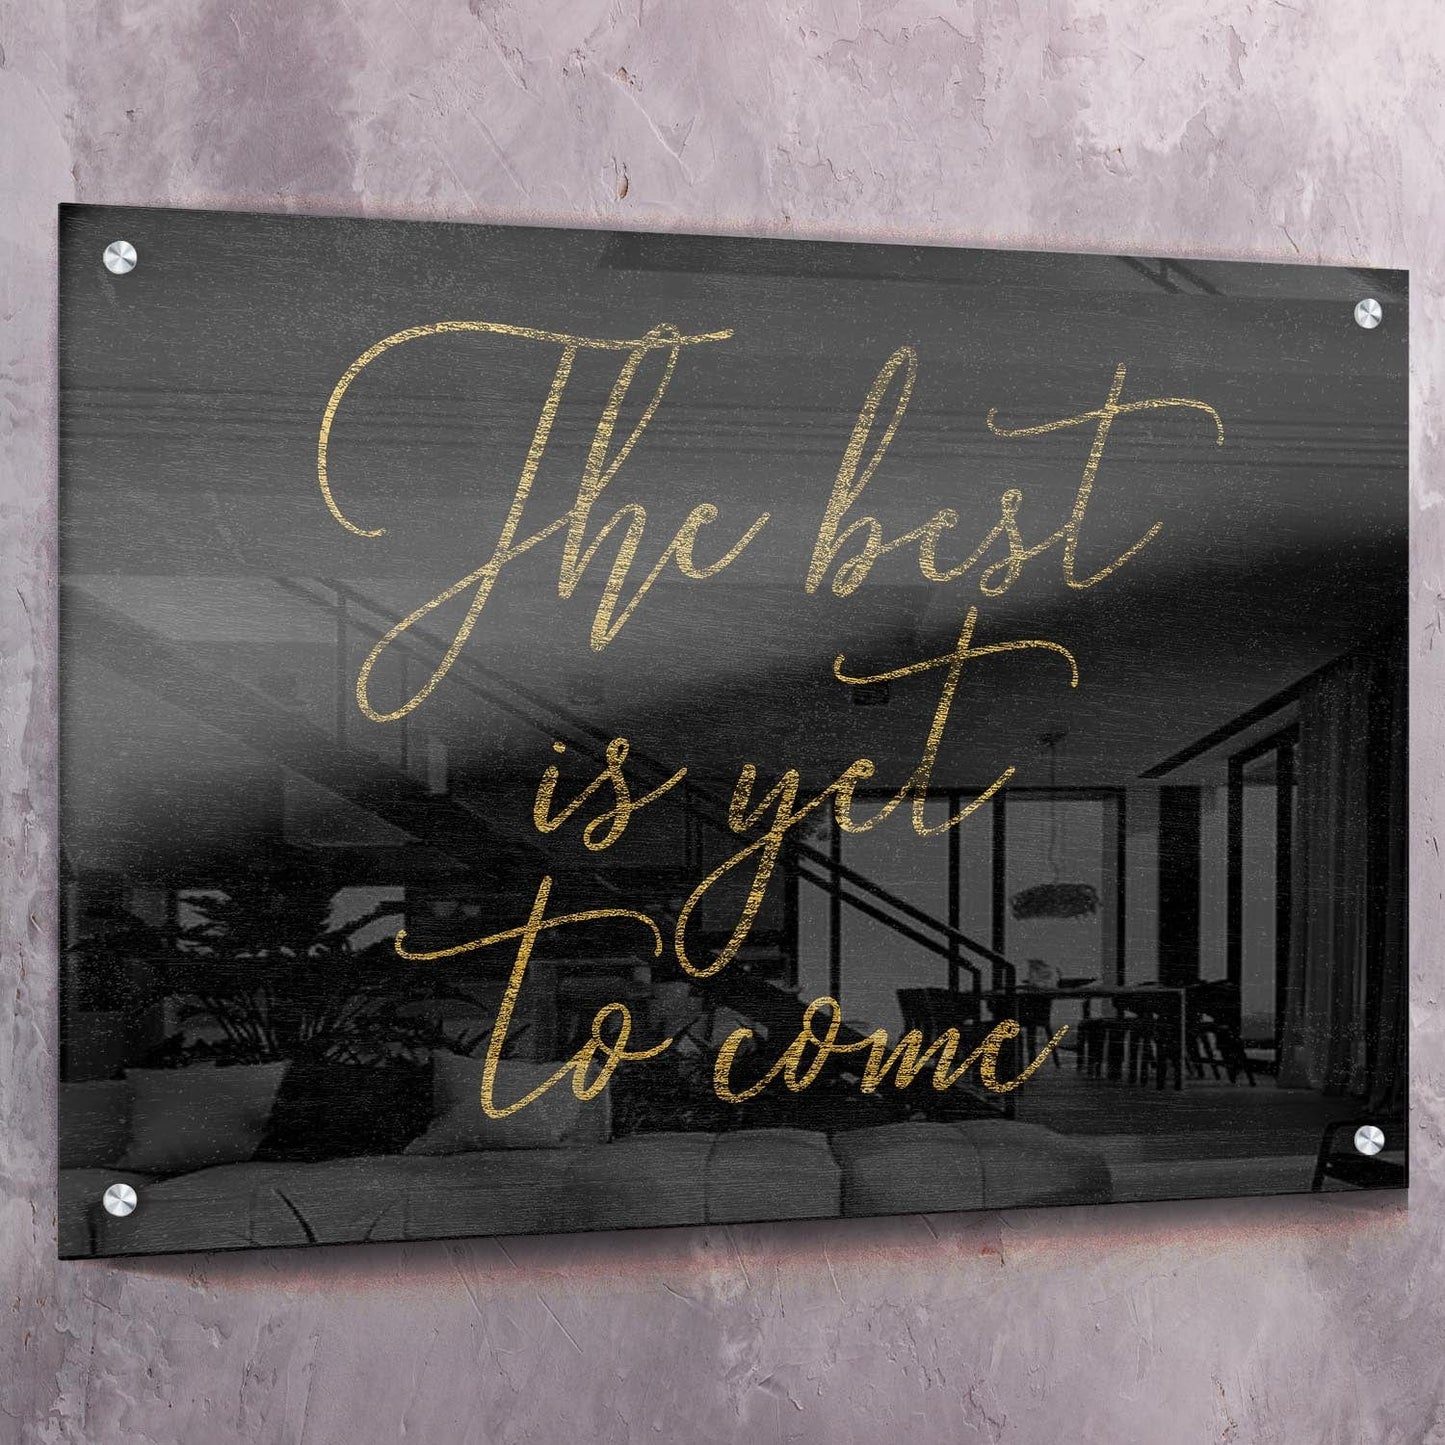 The Best Is Yet To Come Wall Art | Inspirational Wall Art Motivational Wall Art Quotes Office Art | ImpaktMaker Exclusive Canvas Art Landscape